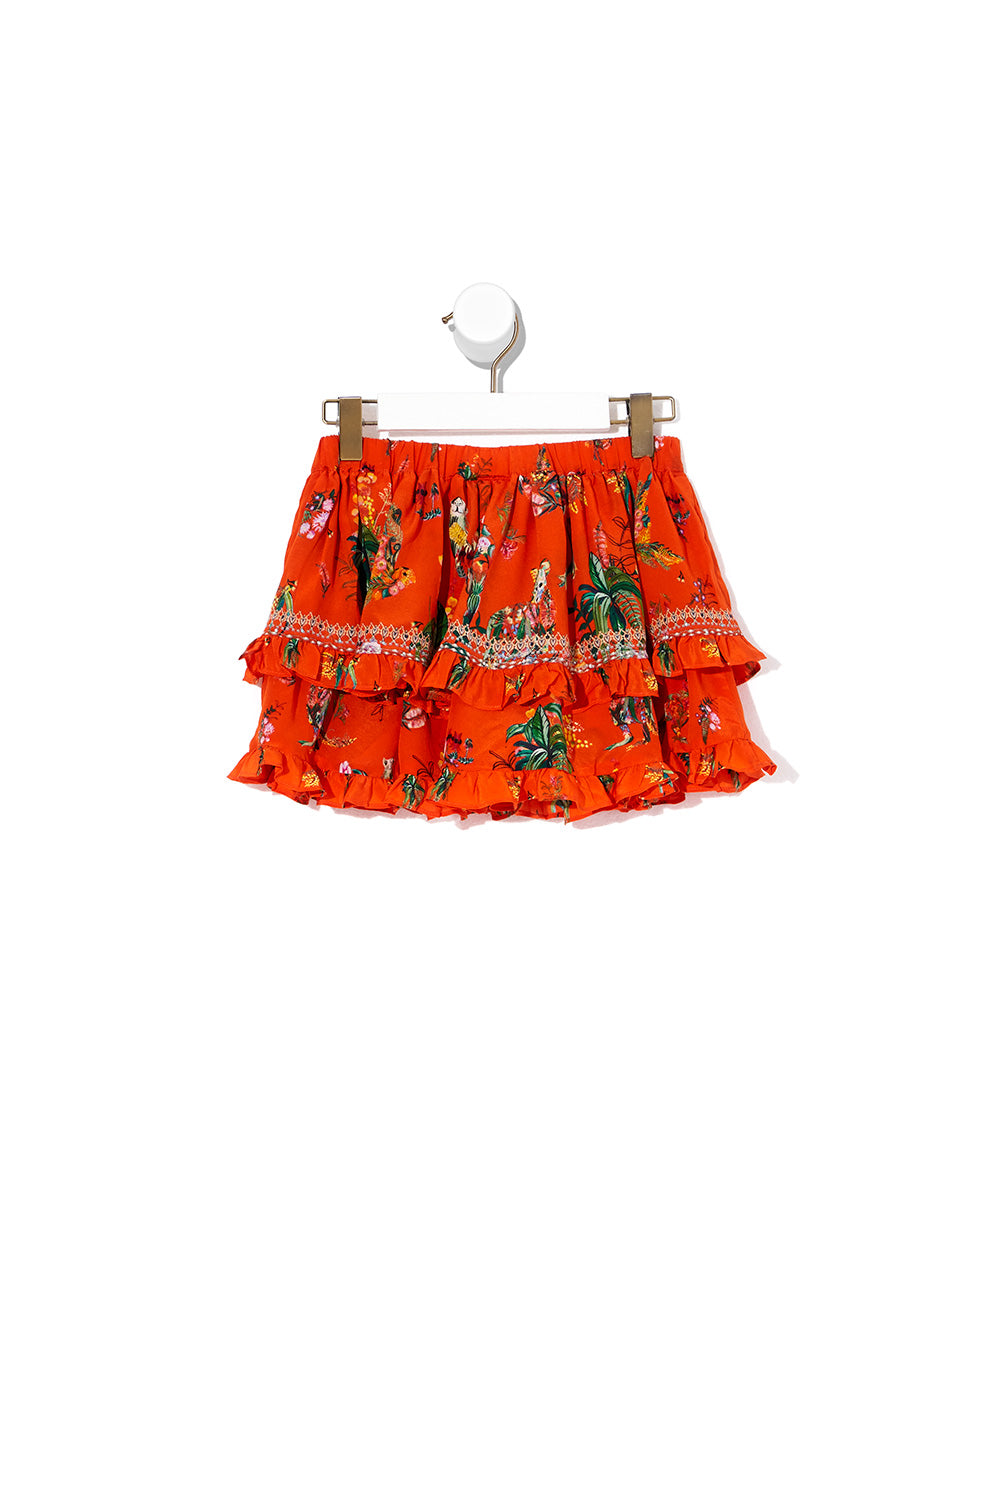 INFANTS DOUBLE LAYER FRILL SKIRT PARADISE CIRCUS